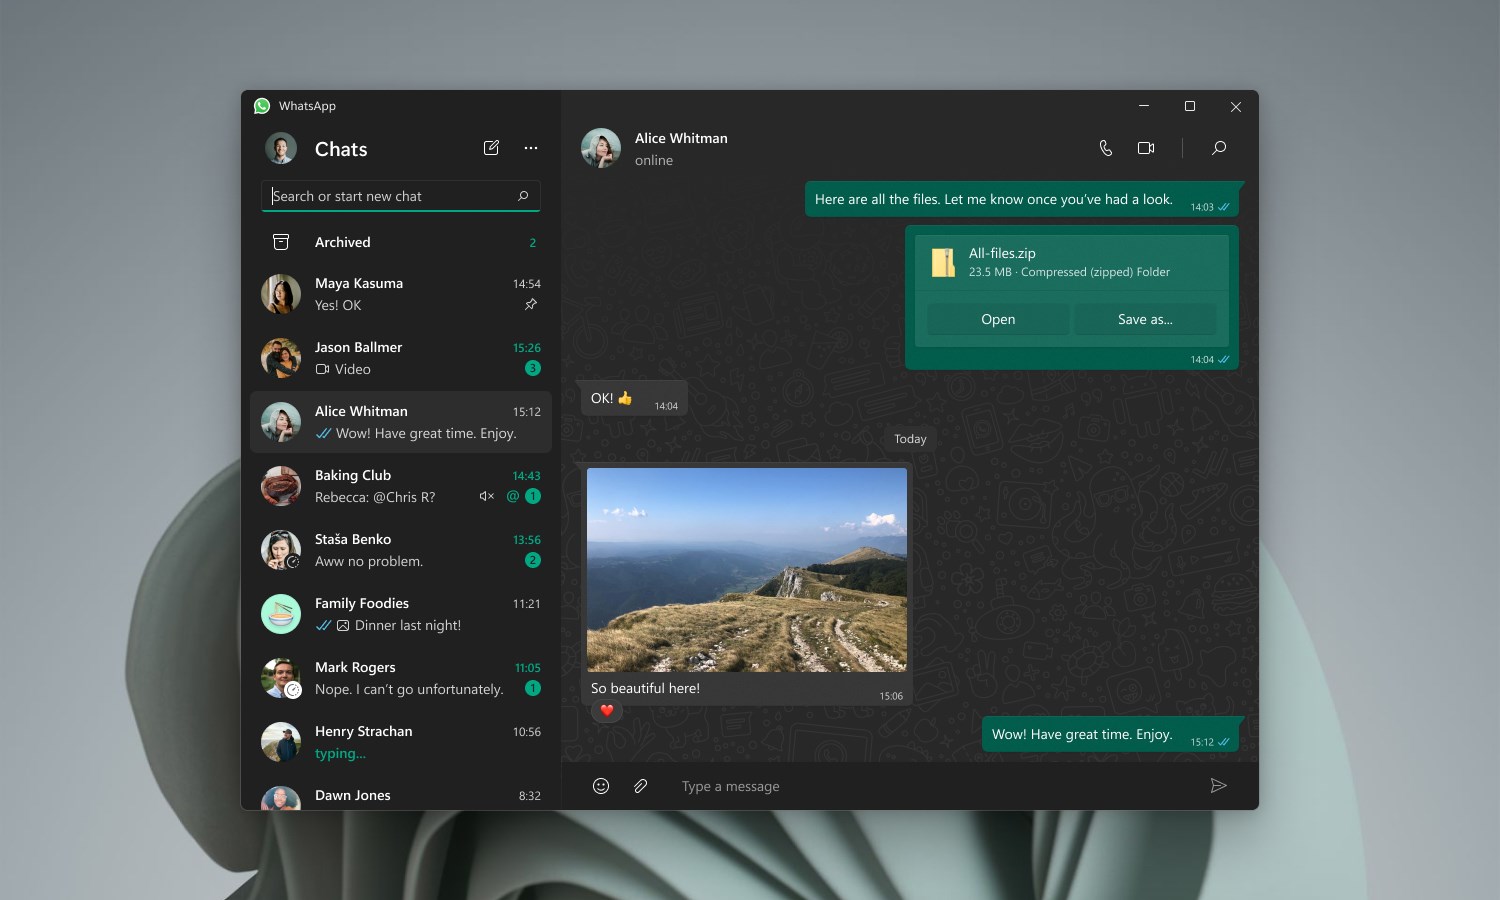 You can now use WhatsApp’s native Windows app on Galaxy Book laptops